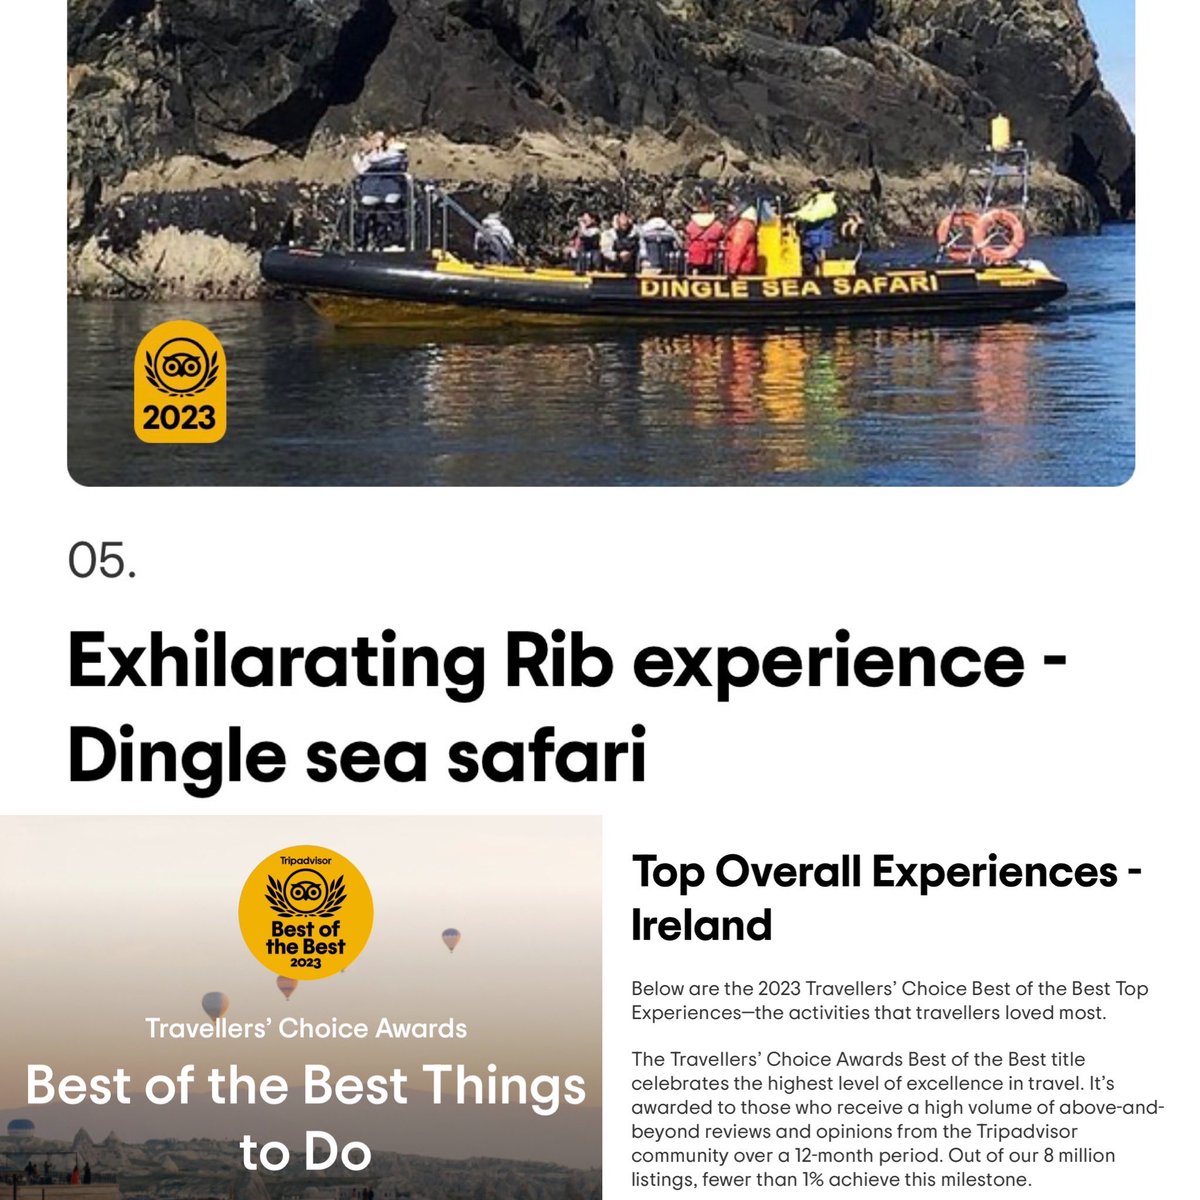 #5 on TripAdvisor’s Top Overall Experiences in Ireland for 2024 🤩🚤 We are delighted & so grateful to all our customers for the amazing reviews we’ve received on @Tripadvisor over the past 12 months for us to come in the top 5 of the Top Overall Experiences in Ireland